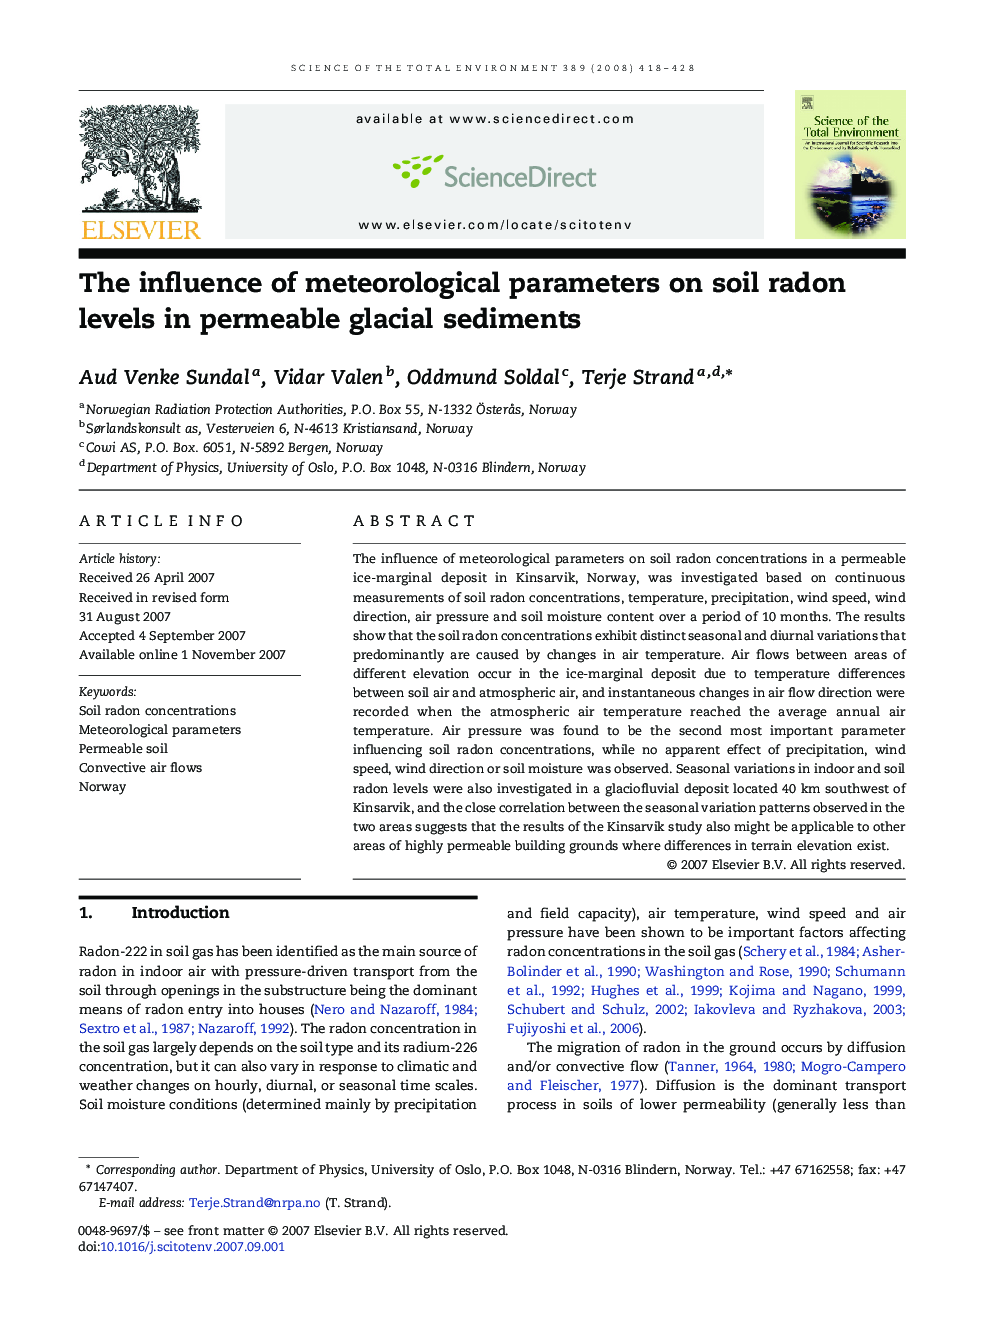 The influence of meteorological parameters on soil radon levels in permeable glacial sediments